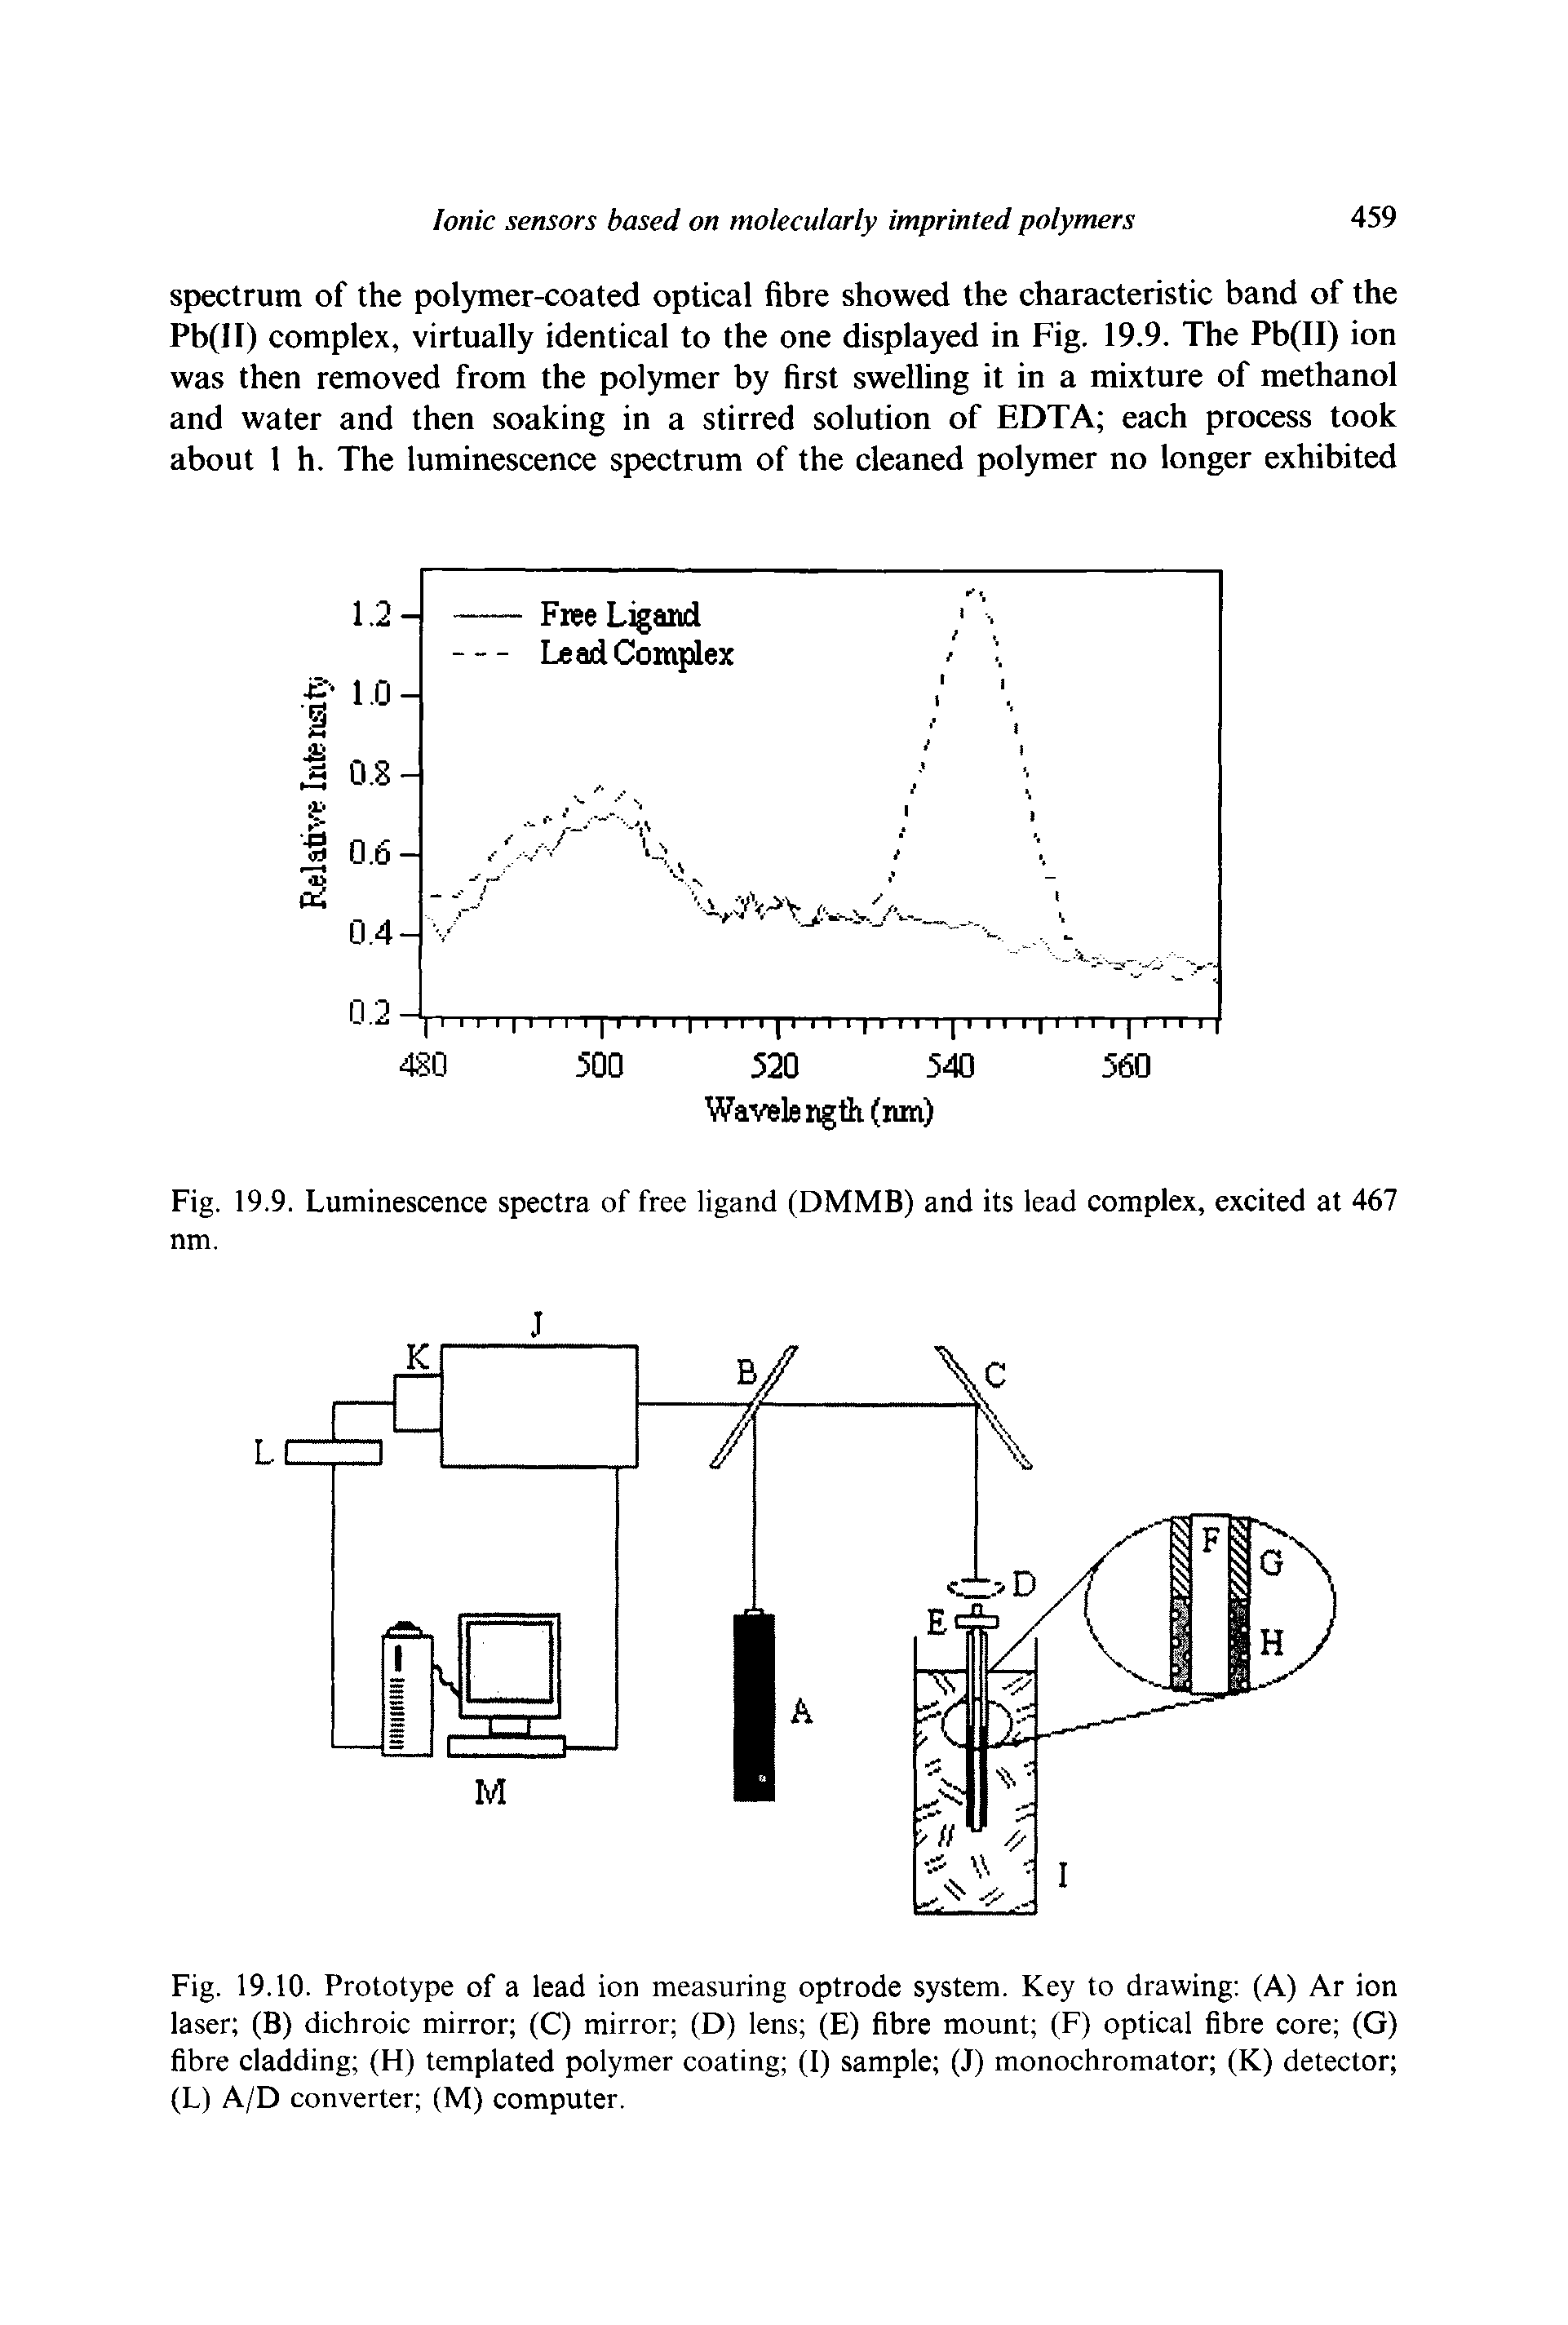 Fig. 19.10. Prototype of a lead ion measuring optrode system. Key to drawing (A) Ar ion laser (B) dichroic mirror (C) mirror (D) lens (E) fibre mount (F) optical fibre core (G) fibre cladding (H) templated polymer coating (I) sample (J) monochromator (K) detector (L) A/D converter (M) computer.